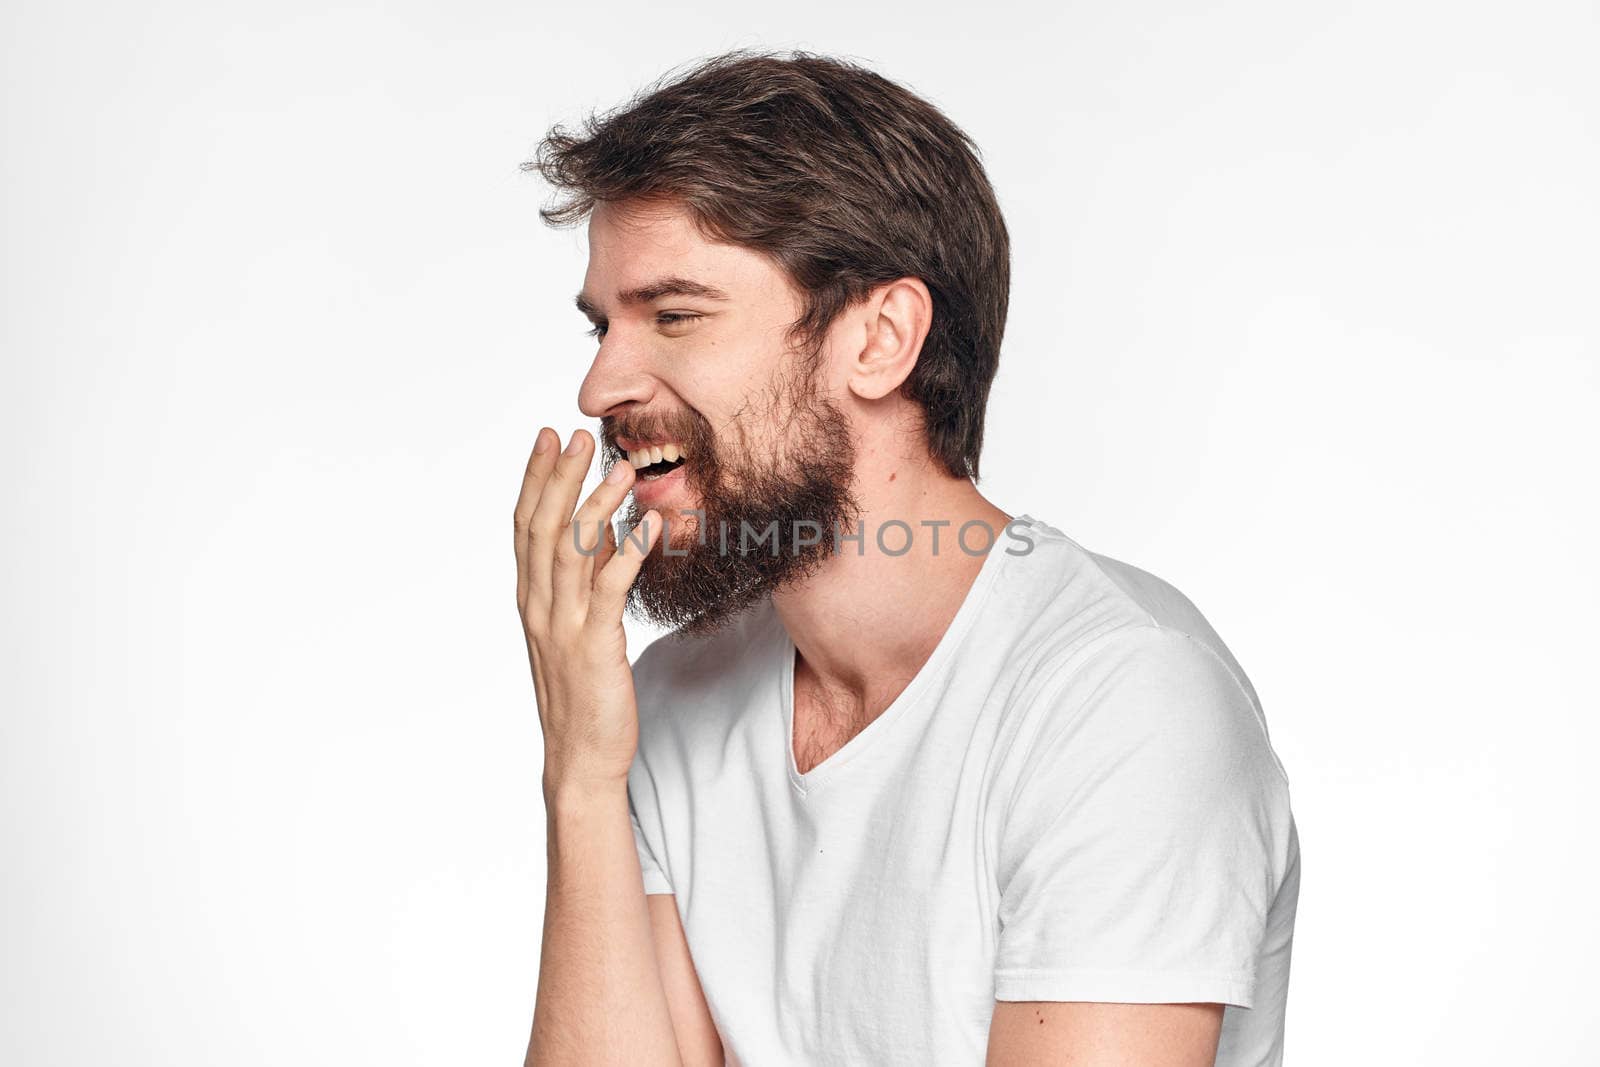 cheerful bearded man in a white t-shirt emotions gestures with his hands light background studio. High quality photo